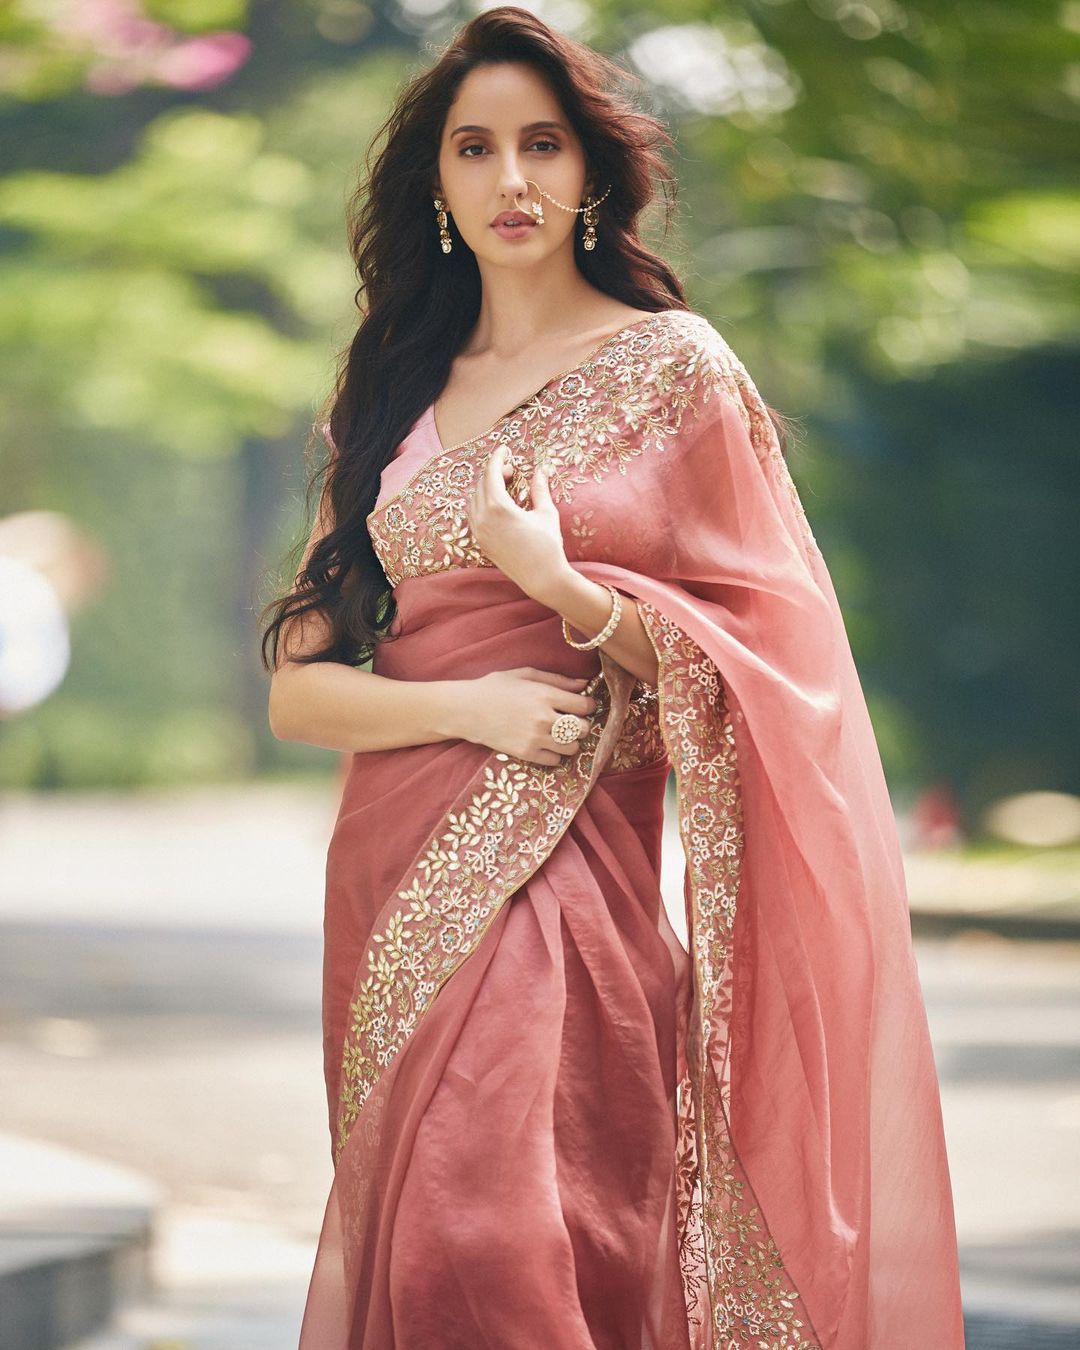 Nora Fatehi looks like a dream in the pink saree with the embellished border.